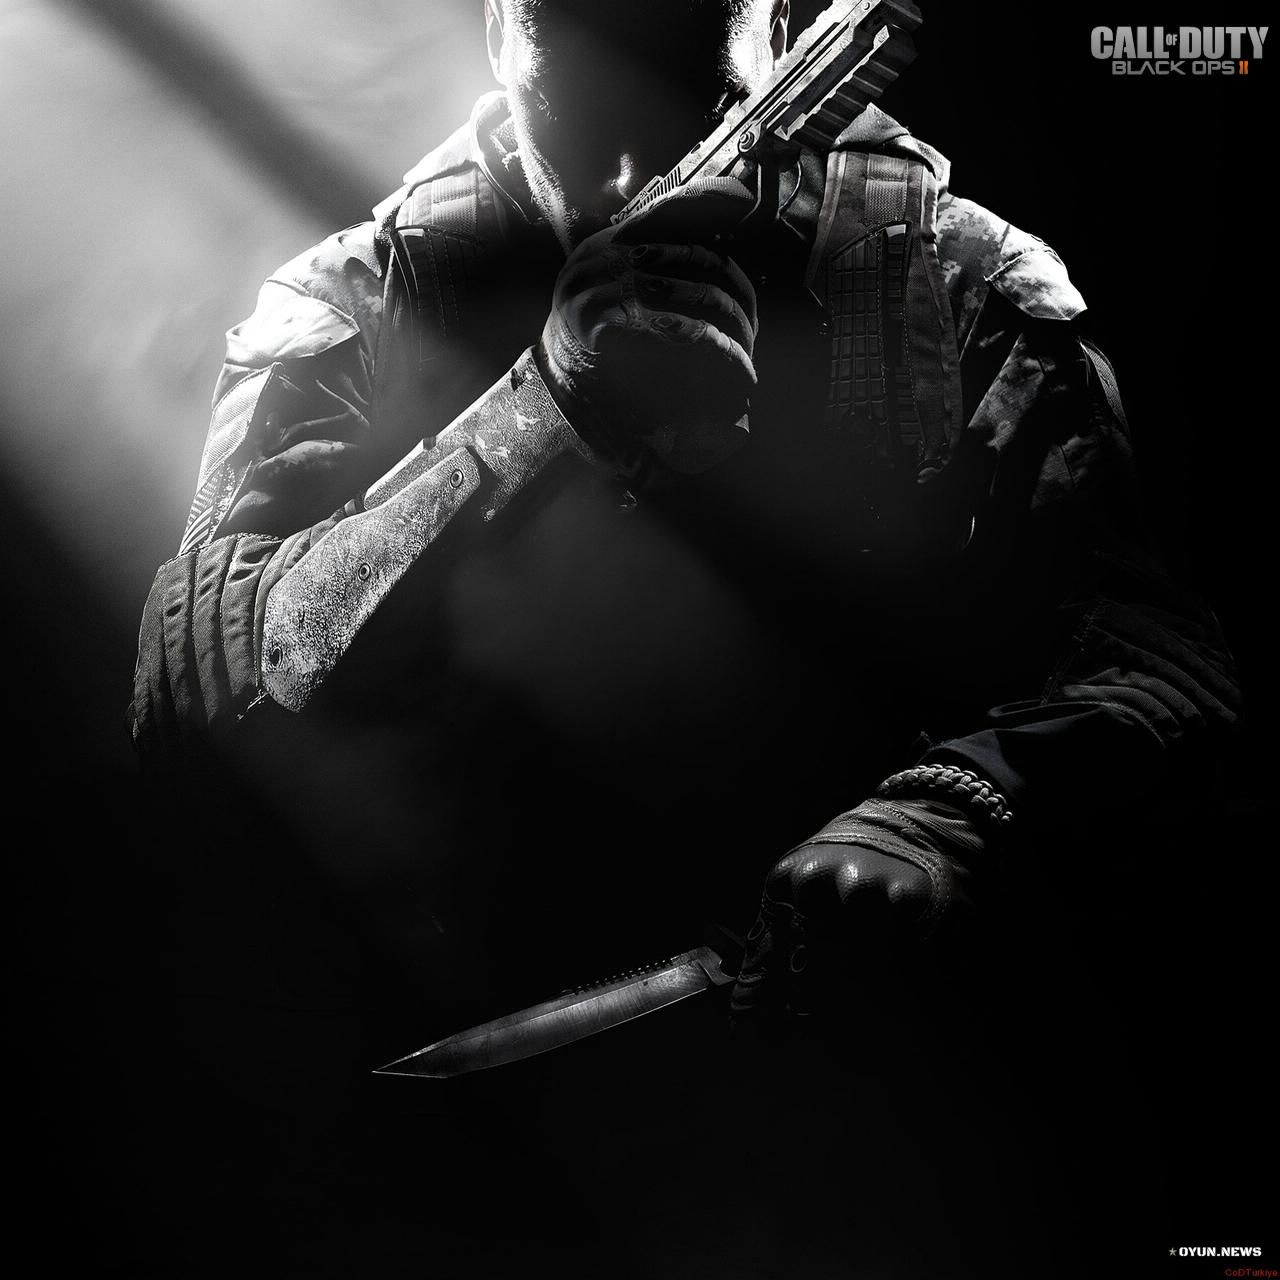 Call Of Duty 9 Black Ops 2 Wallpapers Hd 20